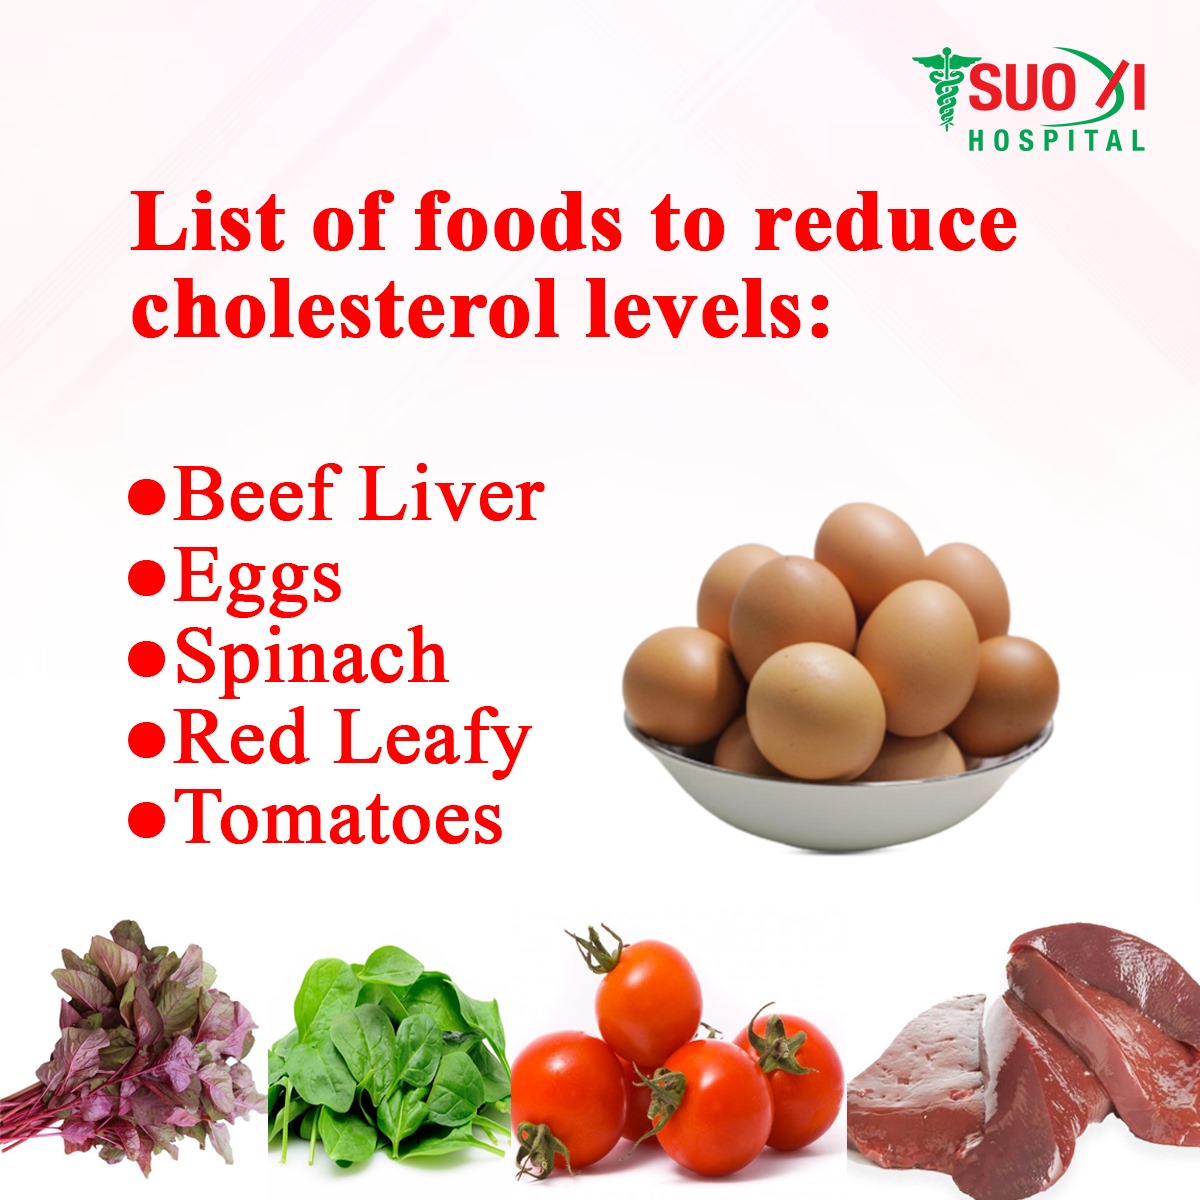 List of Foods to Reduce Cholesterol Levels

#healthylifestyle #hearthealth #wellness #eatclean #nutrition #prevention #naturalremedies #suoxi  #holistichealth #cholesterol #fats #LISA  #cardiovascularhealth #trendingshorts #viralcontent #Islam #food #suoxihospital #besthospital